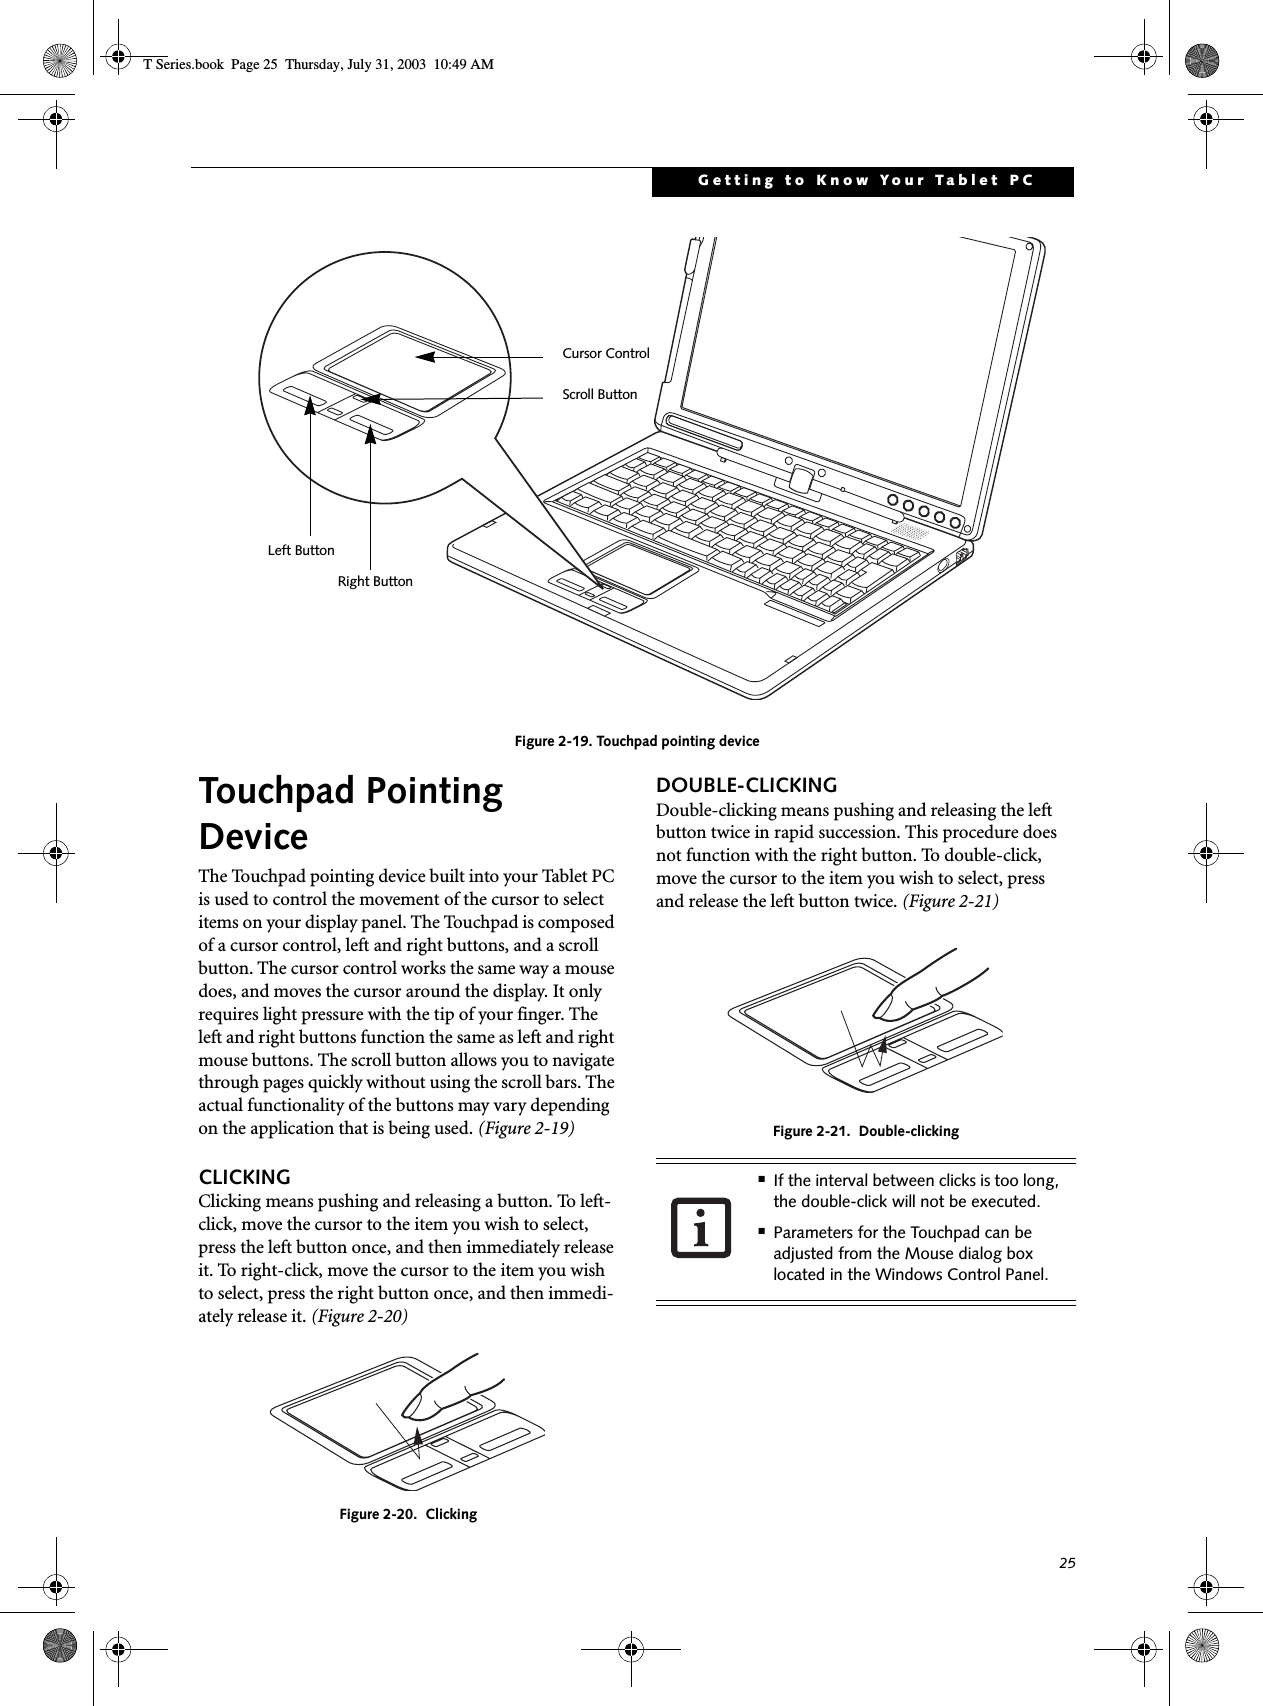 25Getting to Know Your Tablet PCFigure 2-19. Touchpad pointing deviceTouchpad Pointing DeviceThe Touchpad pointing device built into your Tablet PC is used to control the movement of the cursor to select items on your display panel. The Touchpad is composed of a cursor control, left and right buttons, and a scroll button. The cursor control works the same way a mouse does, and moves the cursor around the display. It only requires light pressure with the tip of your finger. The left and right buttons function the same as left and right mouse buttons. The scroll button allows you to navigate through pages quickly without using the scroll bars. The actual functionality of the buttons may vary depending on the application that is being used. (Figure 2-19)CLICKINGClicking means pushing and releasing a button. To left-click, move the cursor to the item you wish to select, press the left button once, and then immediately release it. To right-click, move the cursor to the item you wish to select, press the right button once, and then immedi-ately release it. (Figure 2-20)Figure 2-20.  ClickingDOUBLE-CLICKINGDouble-clicking means pushing and releasing the left button twice in rapid succession. This procedure does not function with the right button. To double-click, move the cursor to the item you wish to select, pressand release the left button twice. (Figure 2-21)Figure 2-21.  Double-clickingLeft ButtonRight ButtonScroll ButtonCursor Control■If the interval between clicks is too long, the double-click will not be executed.■Parameters for the Touchpad can be adjusted from the Mouse dialog box located in the Windows Control Panel.T Series.book  Page 25  Thursday, July 31, 2003  10:49 AM